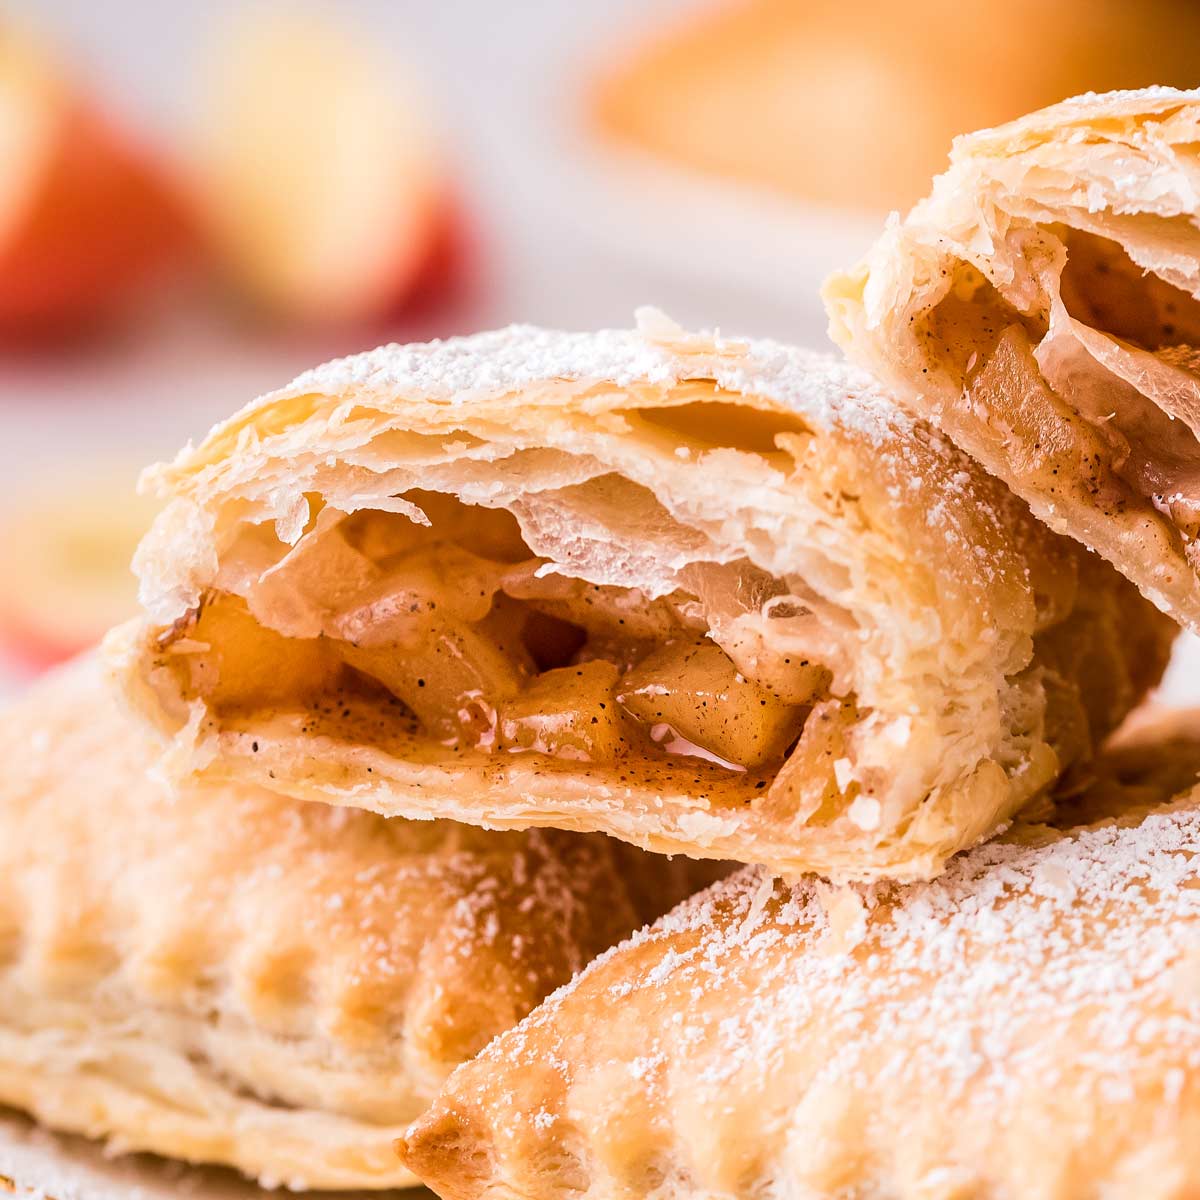 https://www.thechunkychef.com/wp-content/uploads/2020/09/Homemade-Apple-Turnovers-1200.jpg